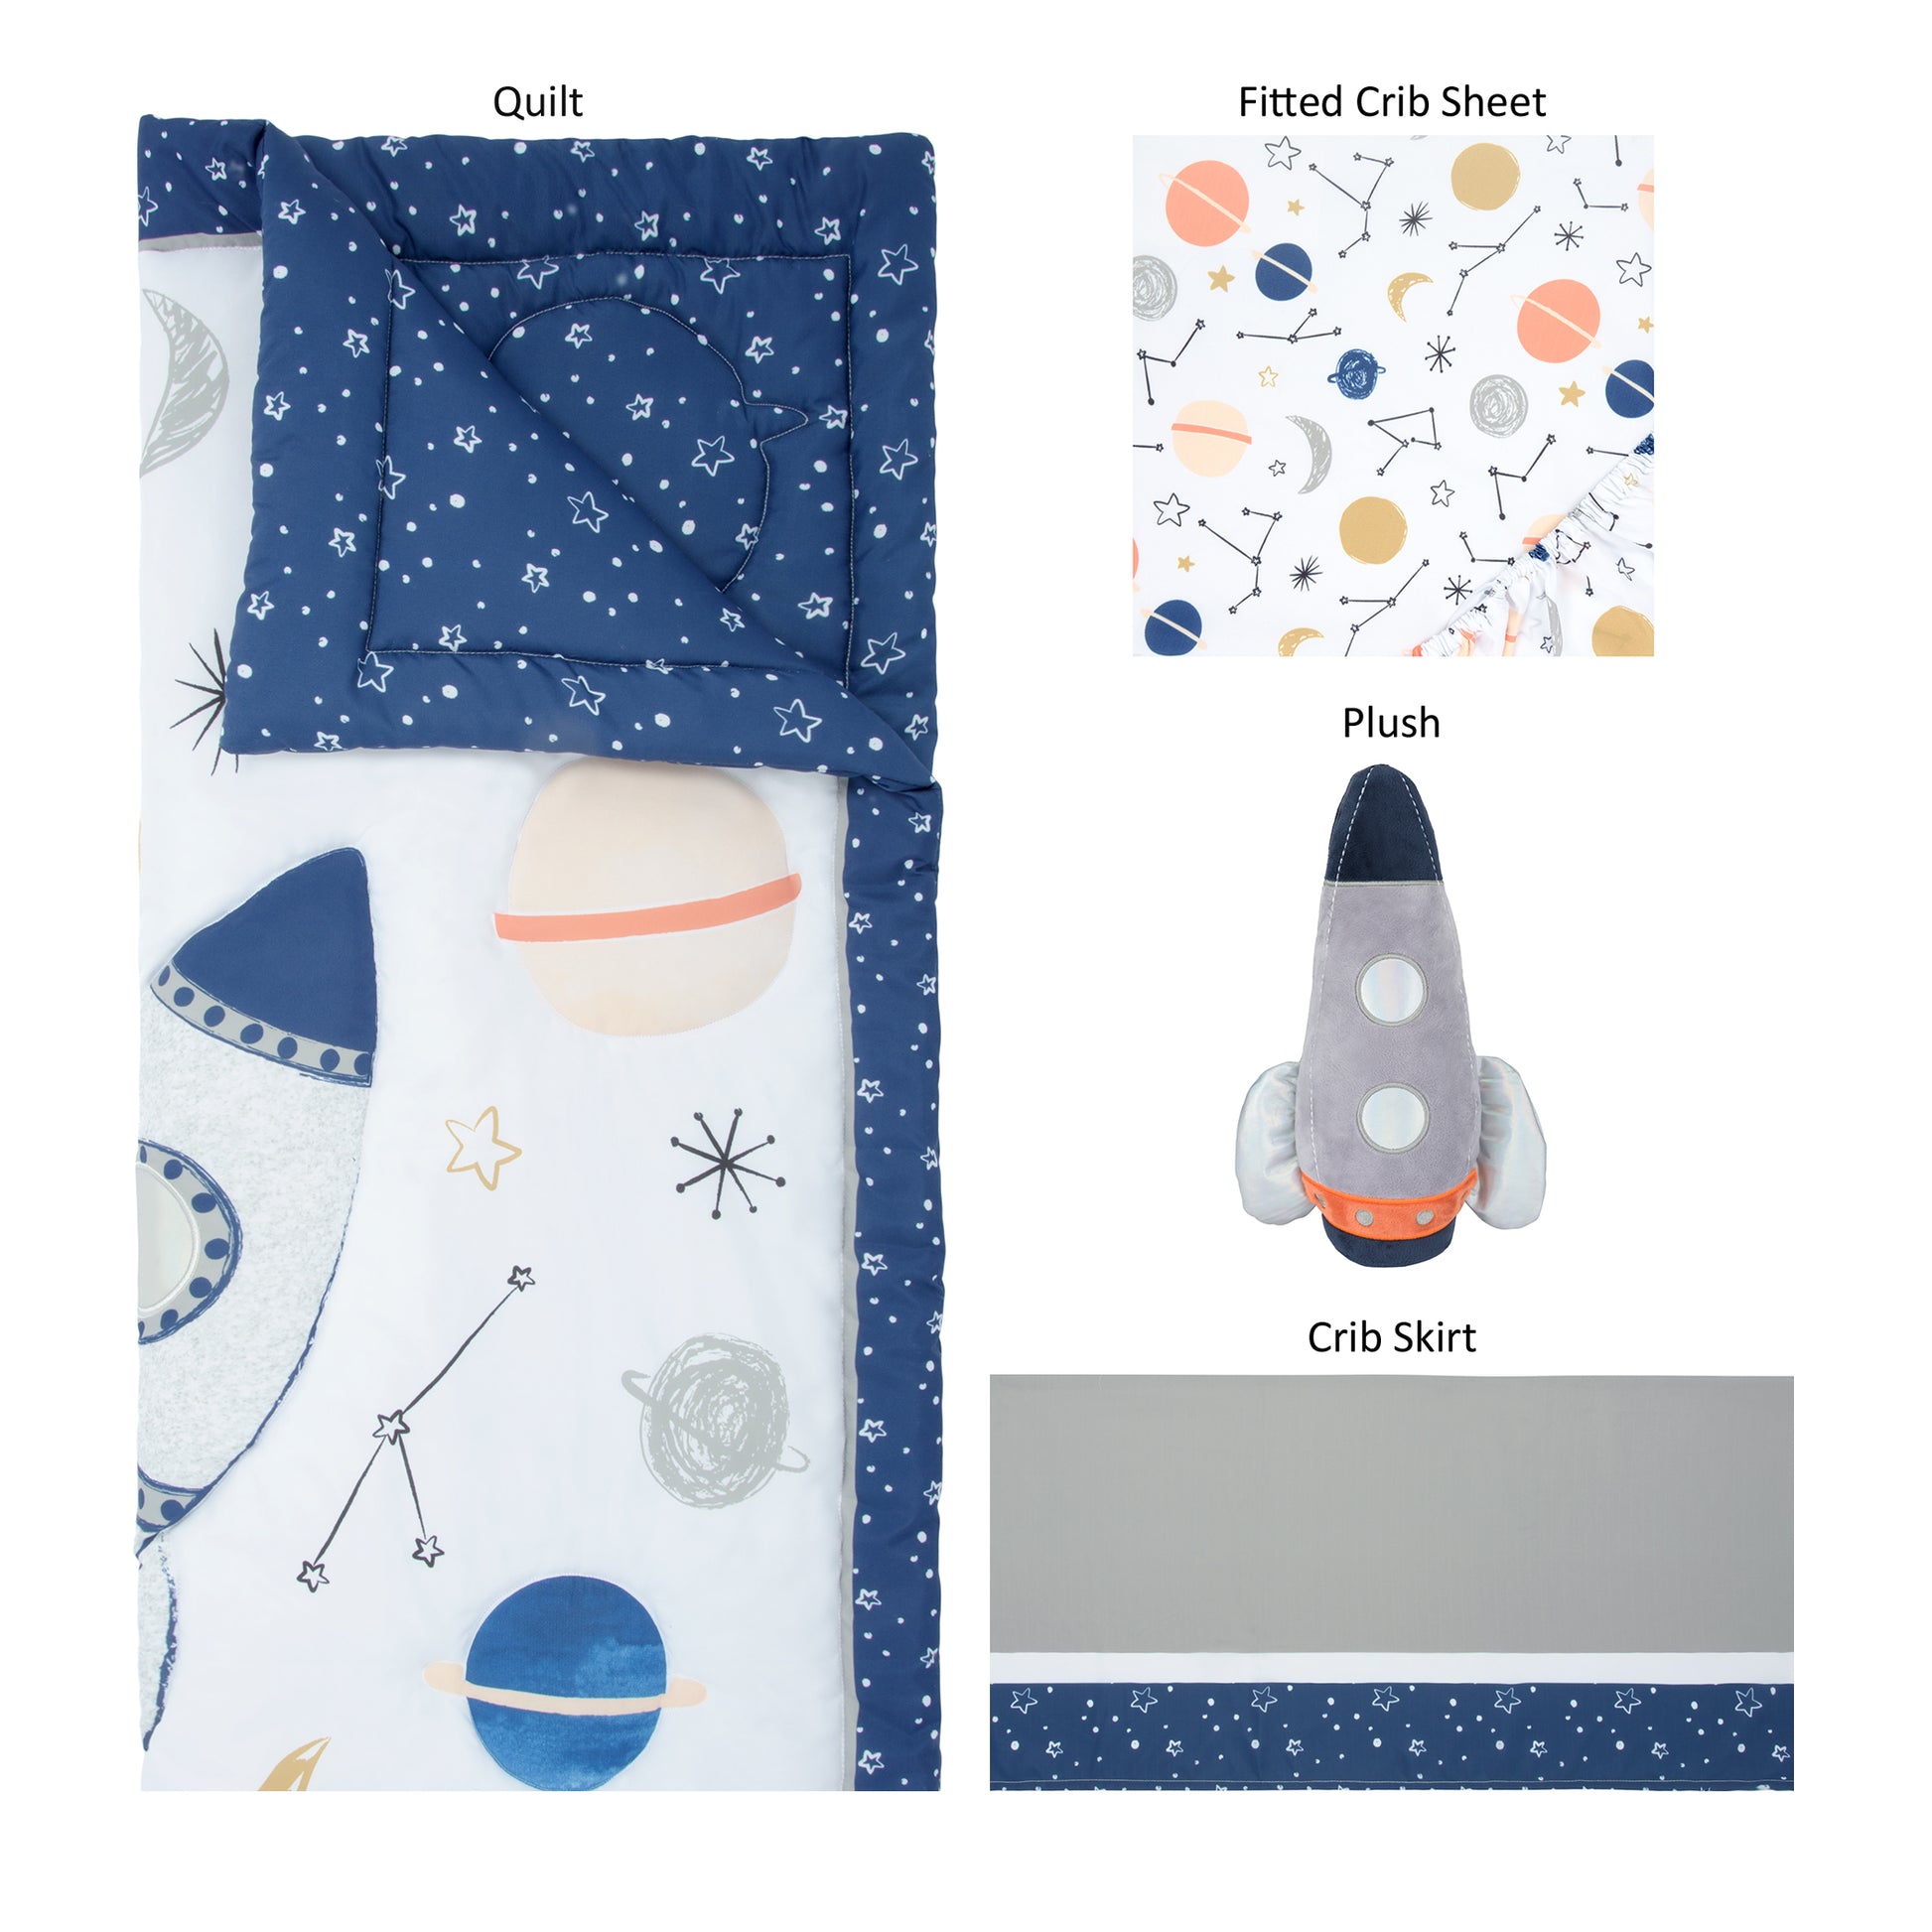 Cosmic Rocket 4 Piece Crib Bedding- pieces laid out includes crib quilt, plush toy, crib sheet and crib skirt